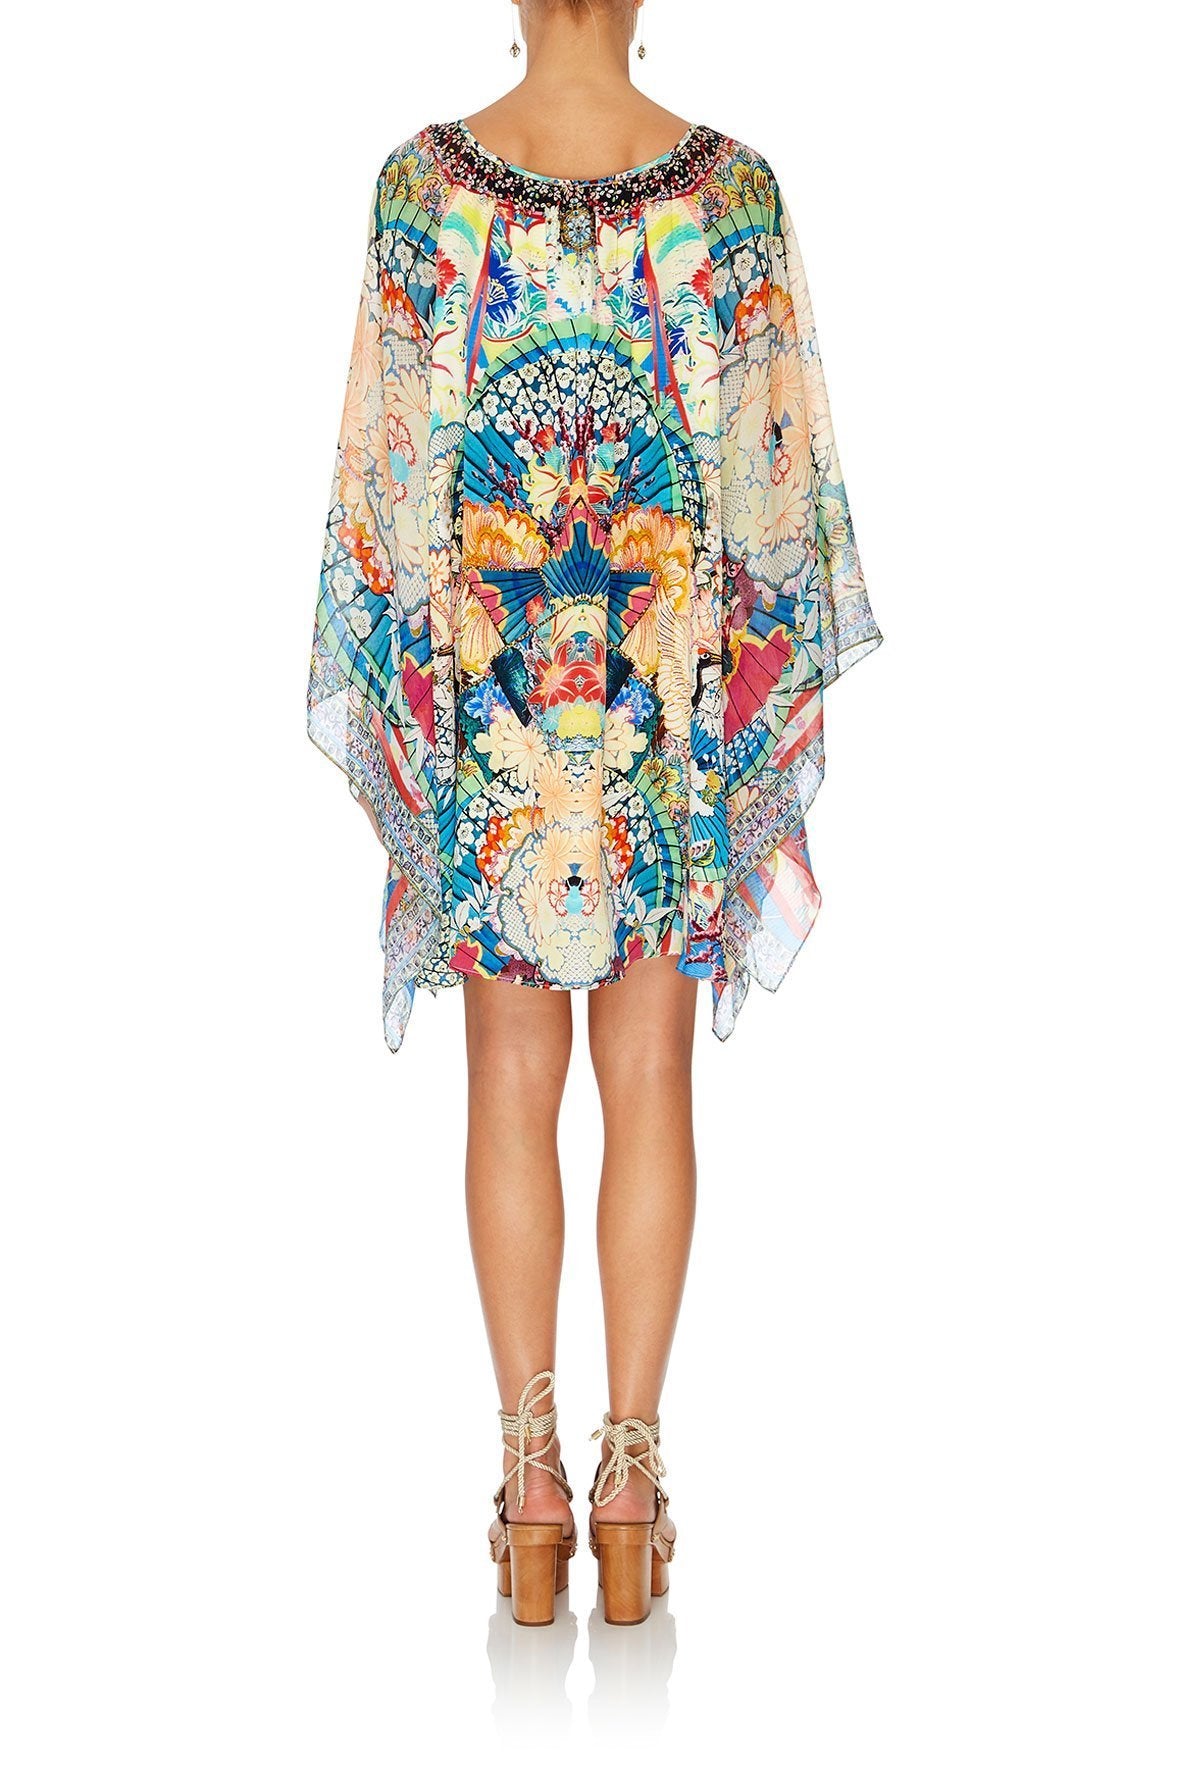 KAFTAN WITH TIE FRONT DETAIL MISO IN LOVE